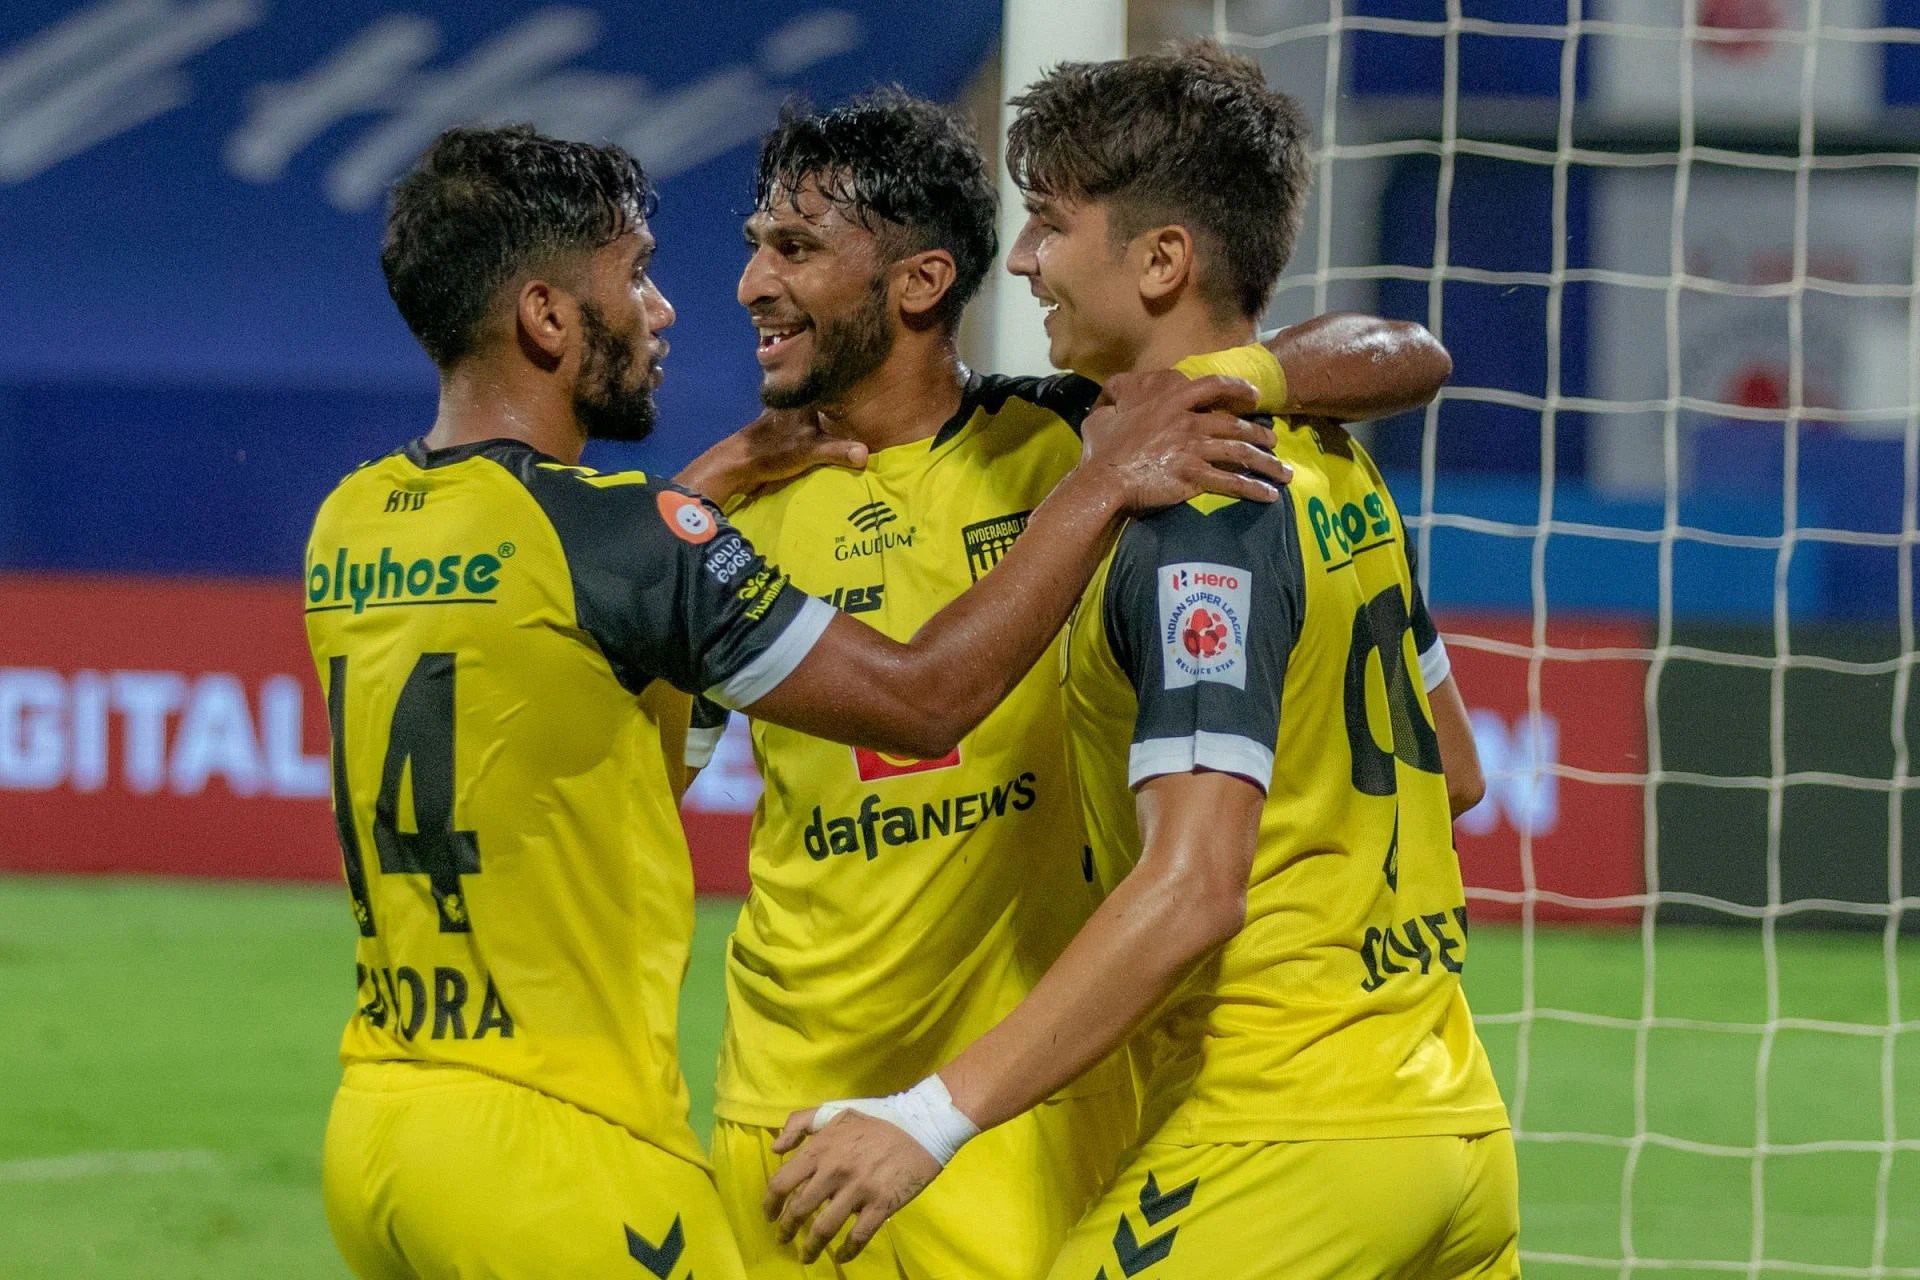 ISL 2022 final: Kerala Blasters fans unhappy as KBFC to play final vs Hyderabad FC in black and blue stripes instead of traditional yellow kit - Check why